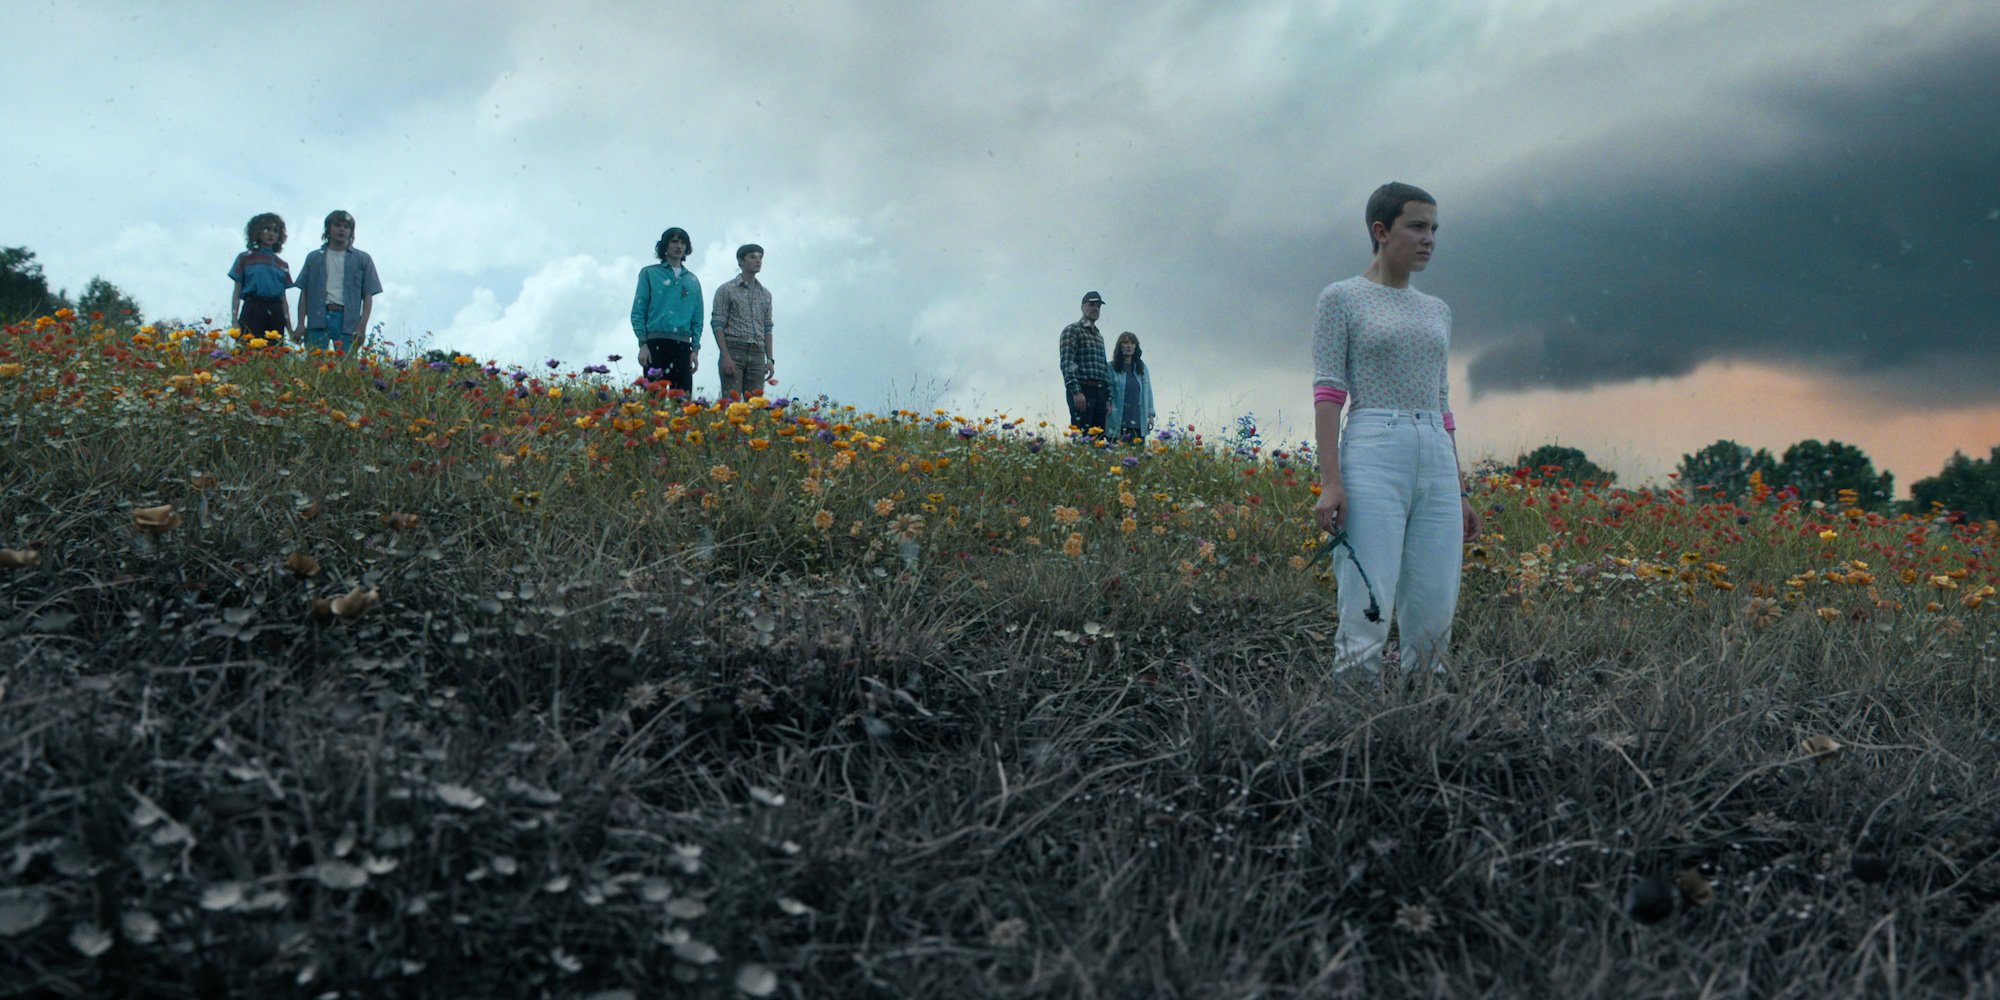 'Stranger Things' Season 5 will have shorter episodes than 'Stranger Things' Season 4. In this production still, the main characters stand on a hillside as the Upside Down begins to take over Hawkins.